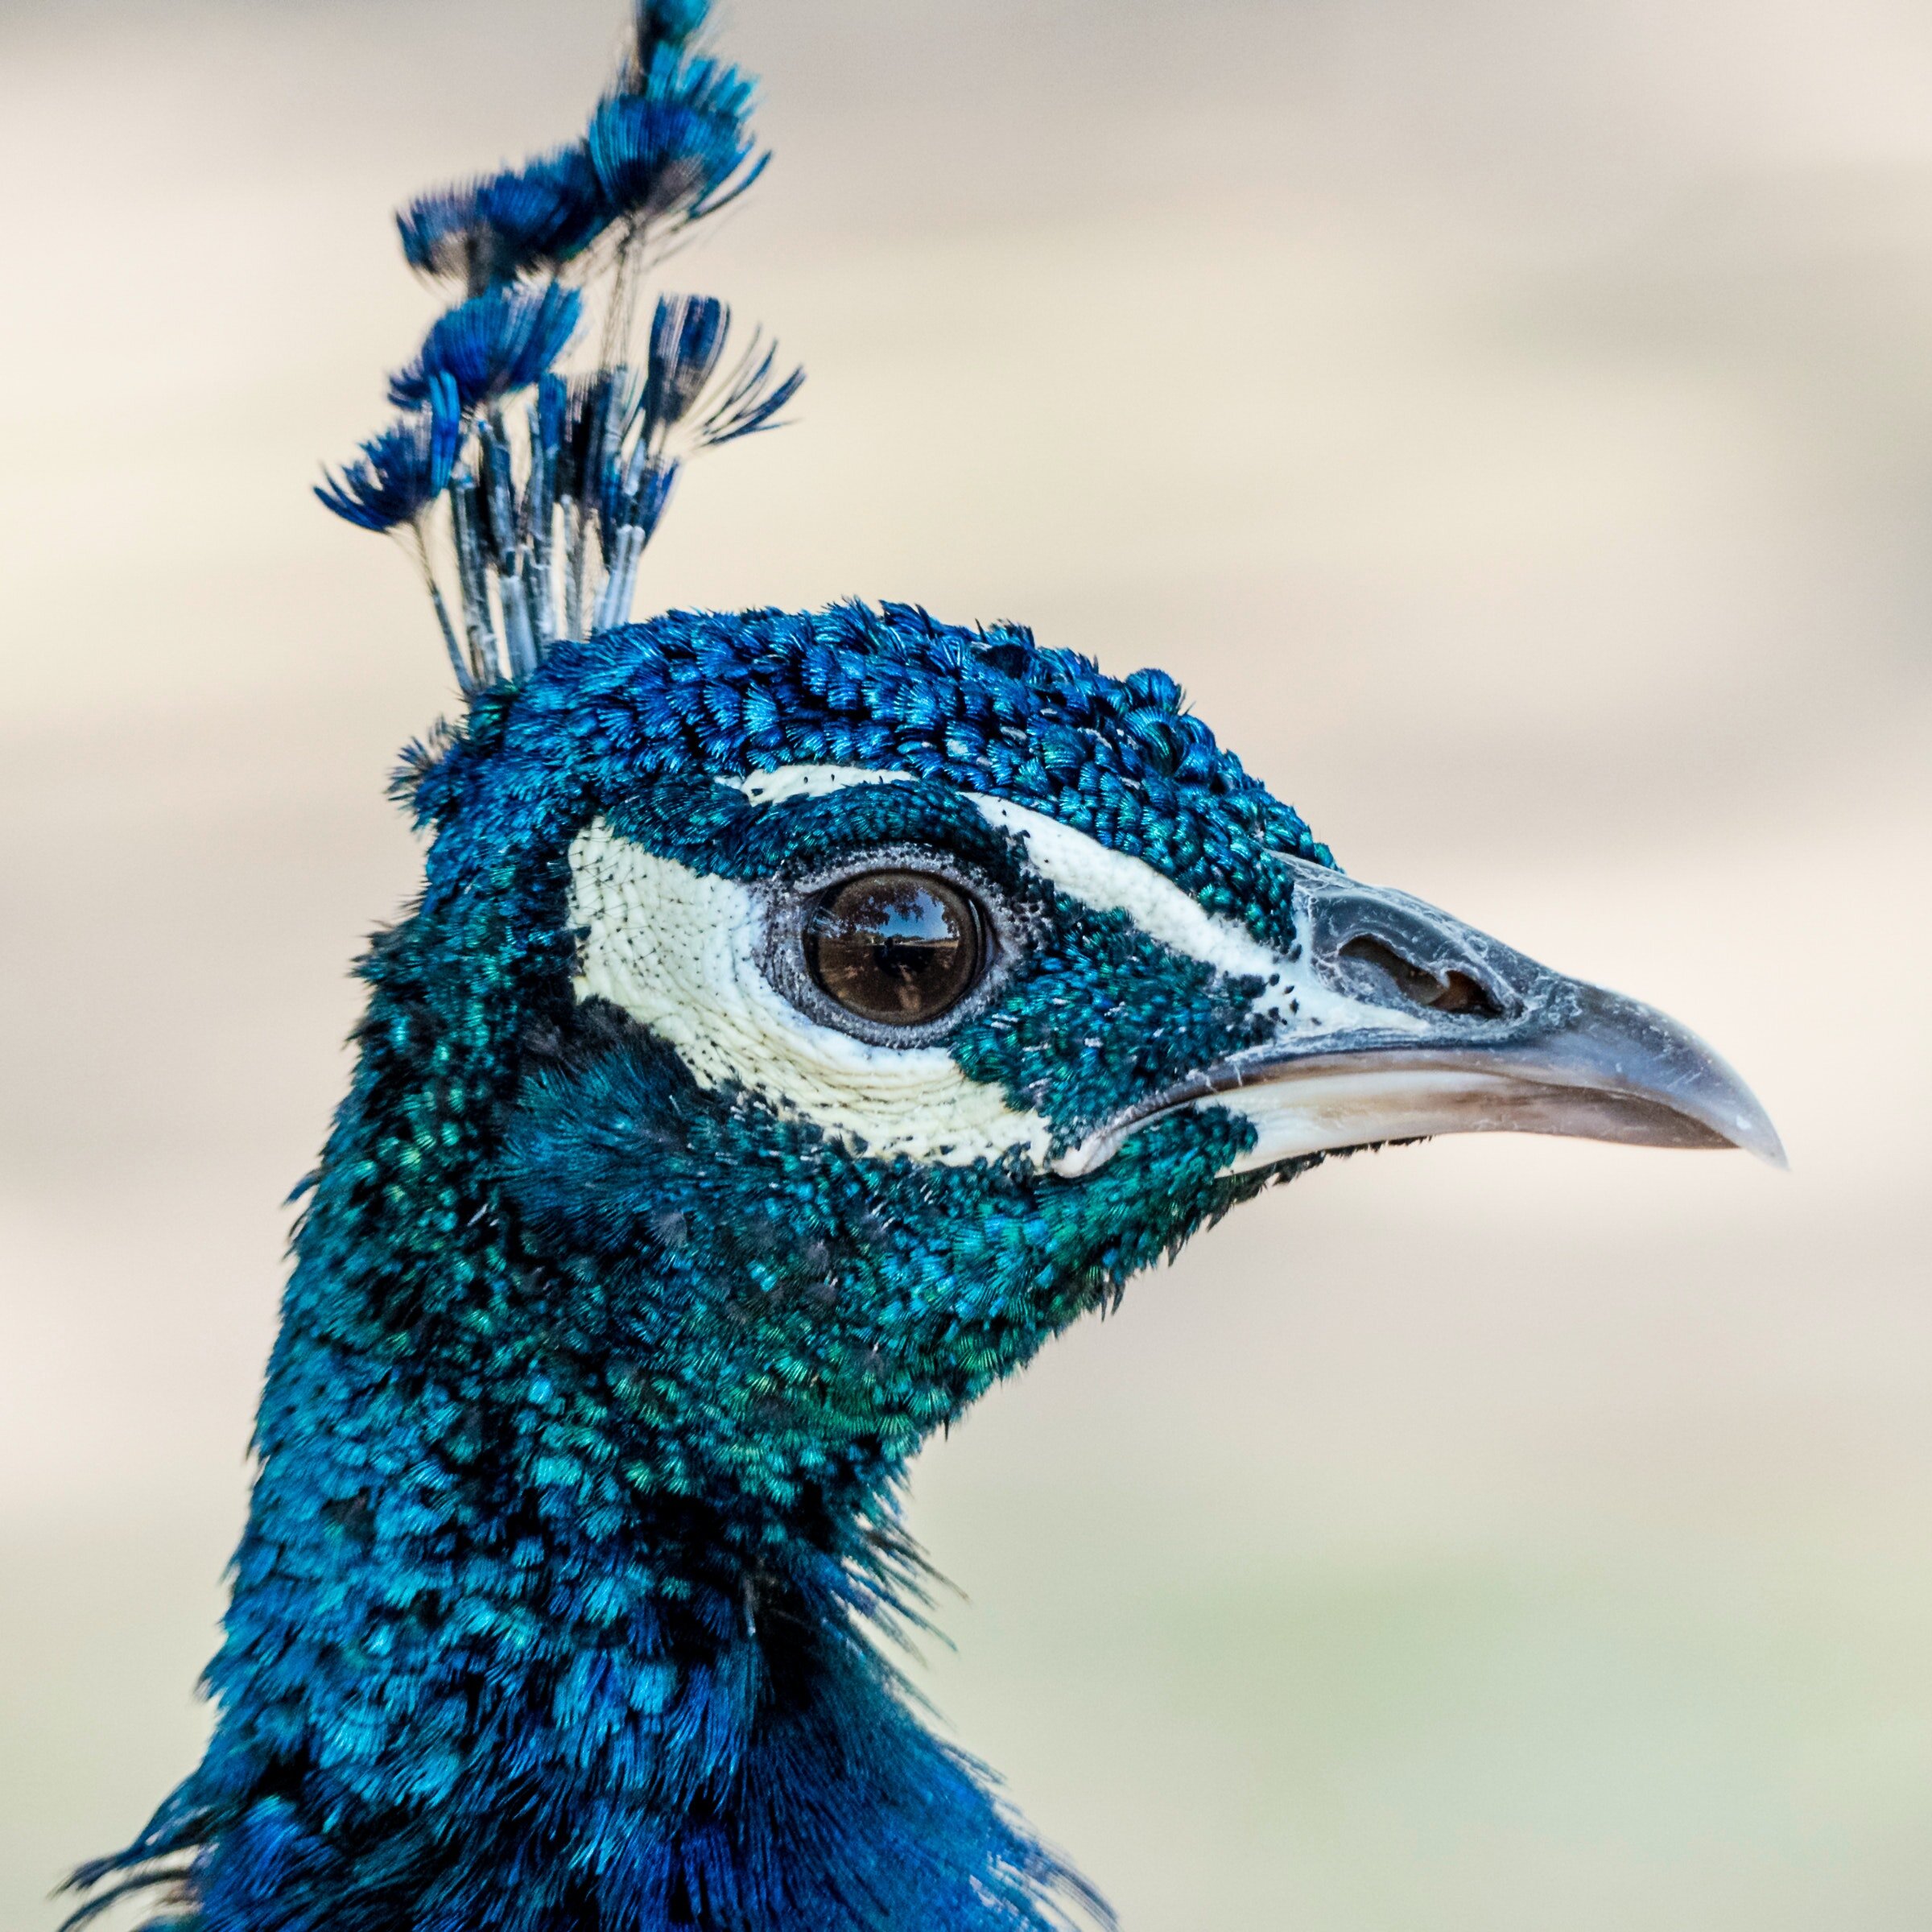 close-up-photography-of-blue-peafowl-1617366.jpg